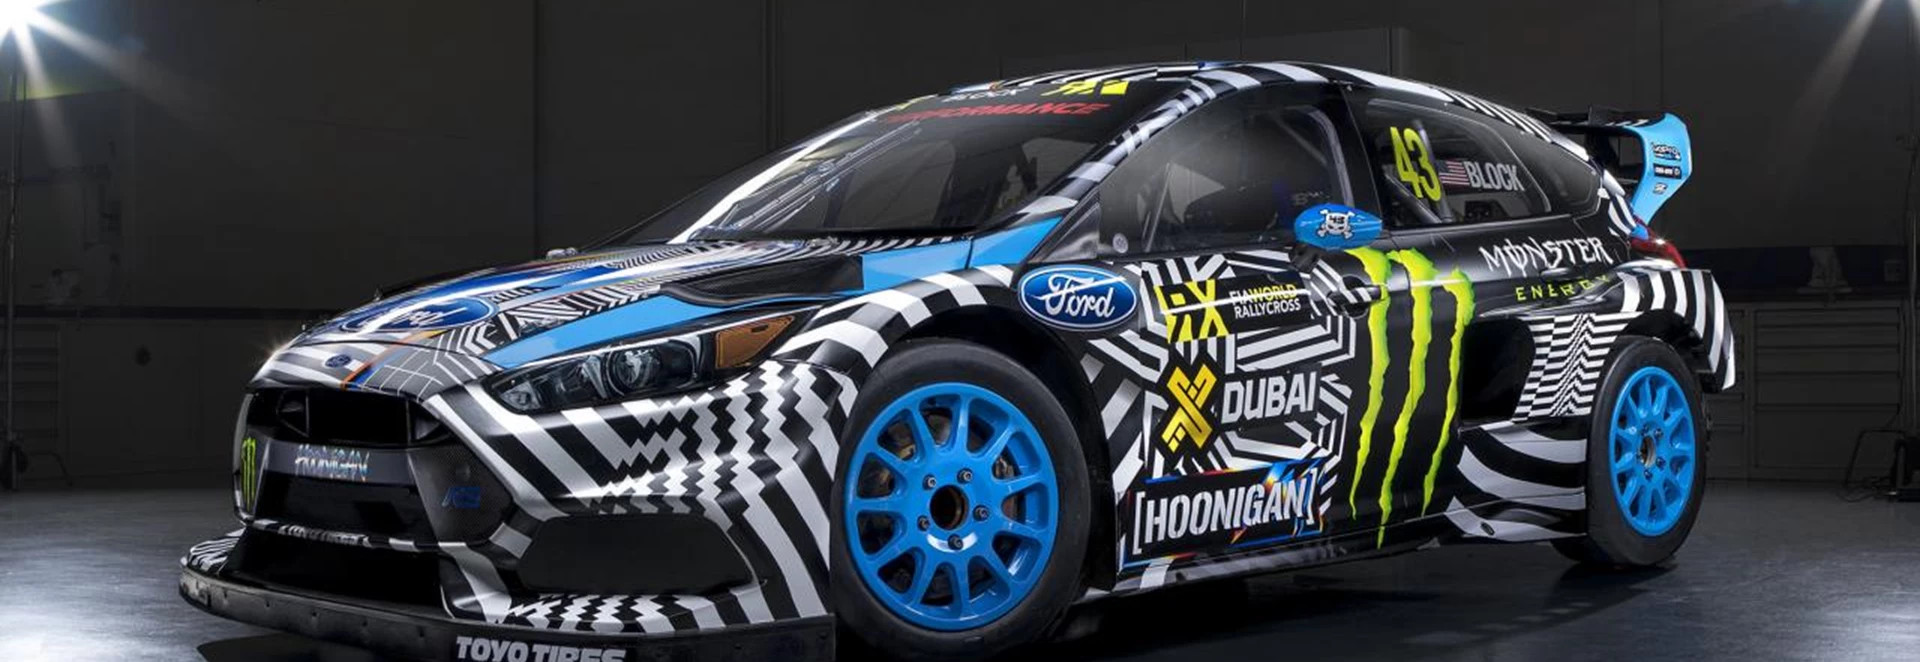 Ken Block’s Gymkhana 9 coming next week, starring the Ford Focus RS RX 